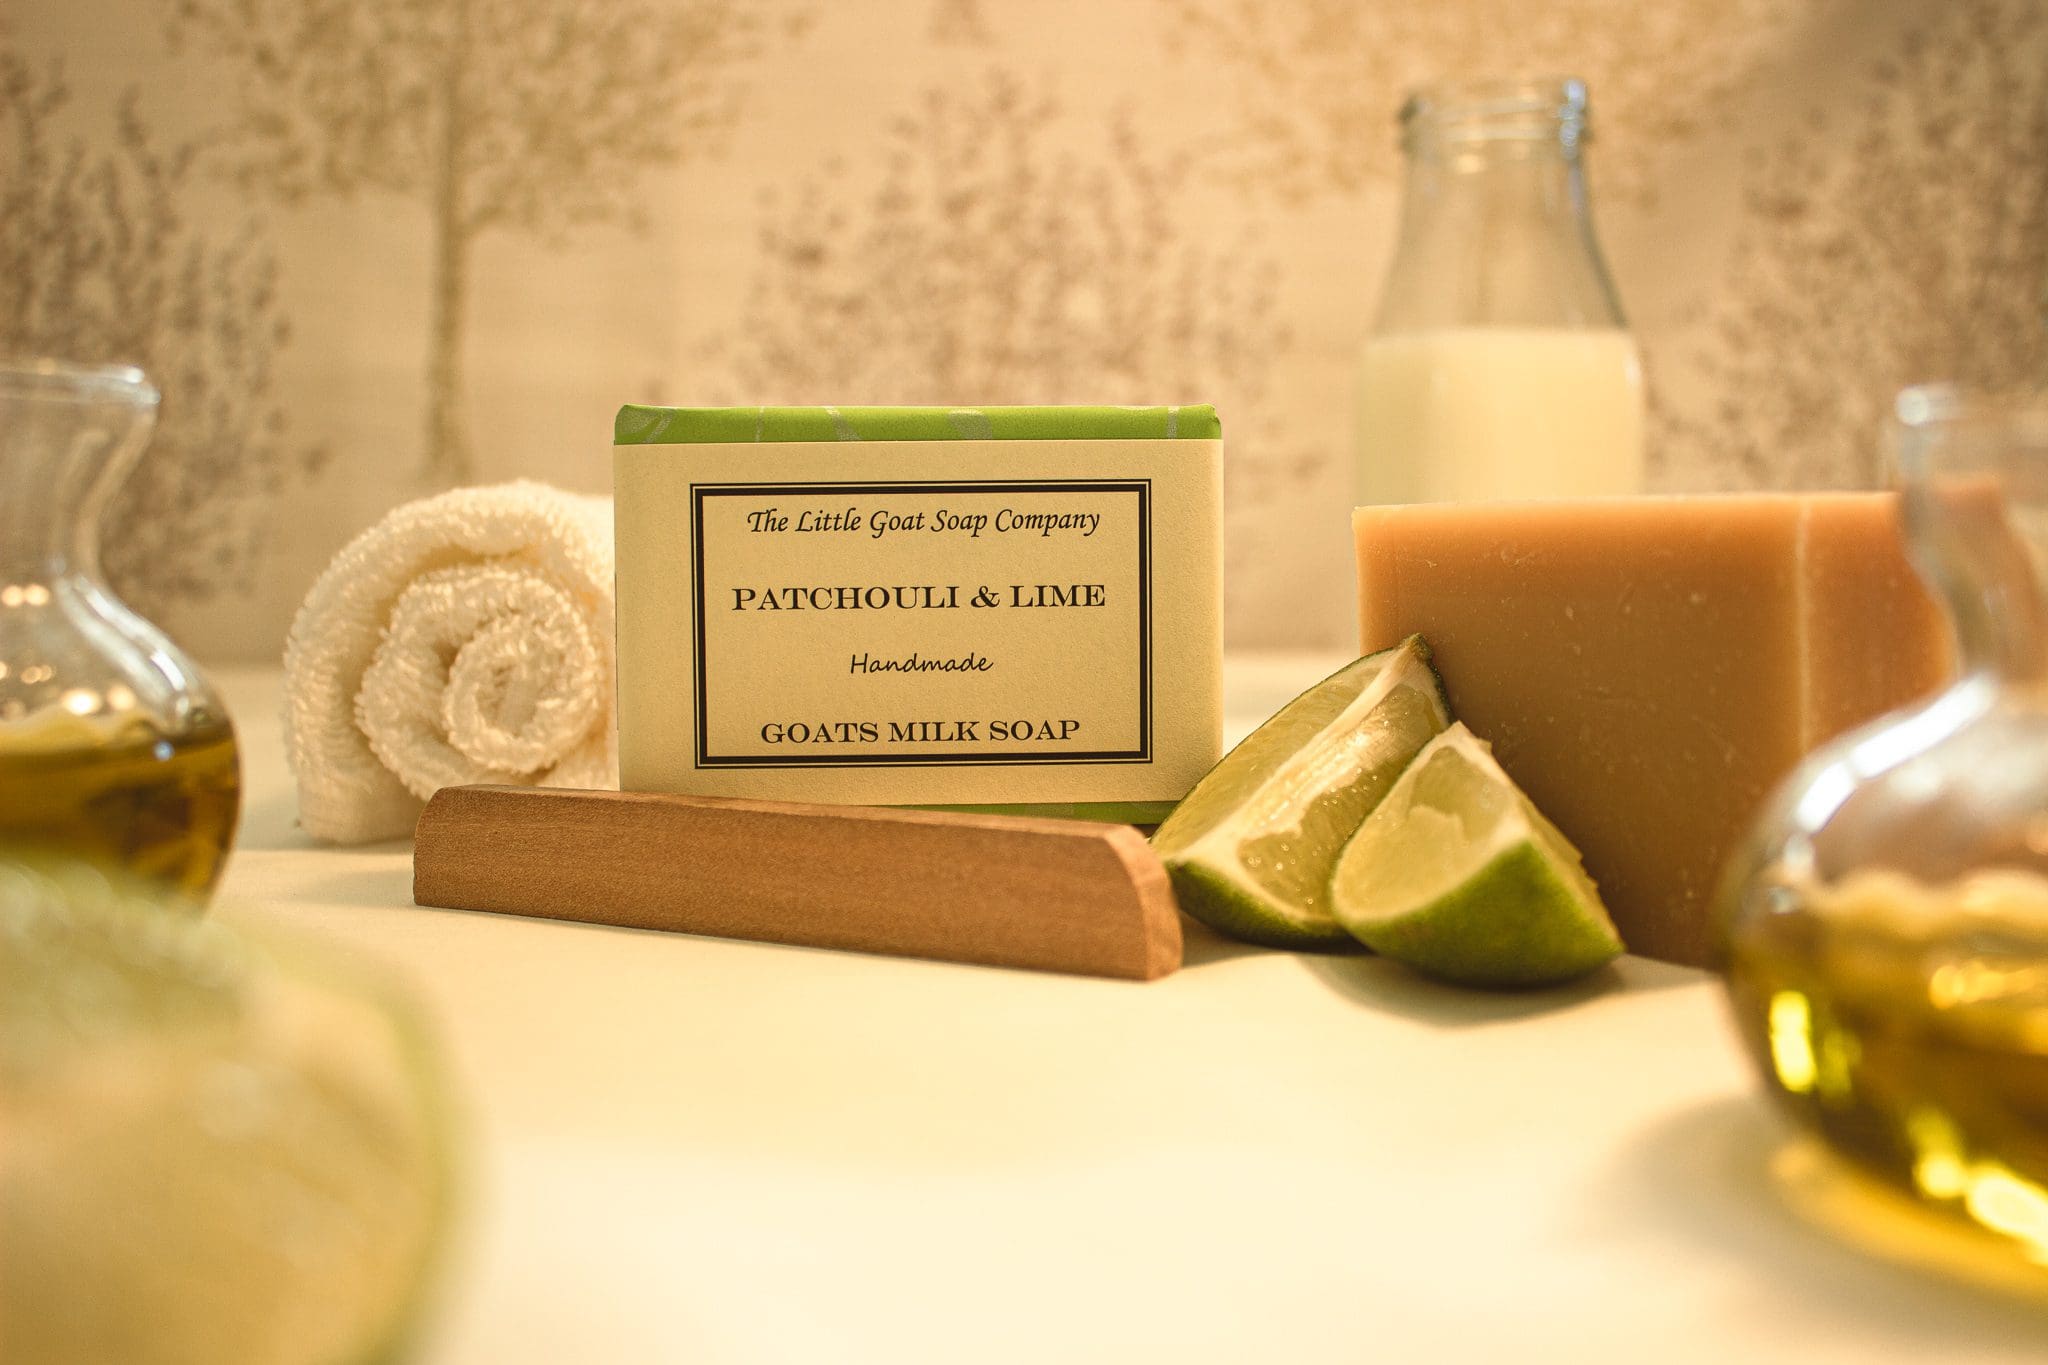 patchouli and lime soap from the little goat soap company set dressed with a rolled flannel, lime wedges and jars of oil and goat milk